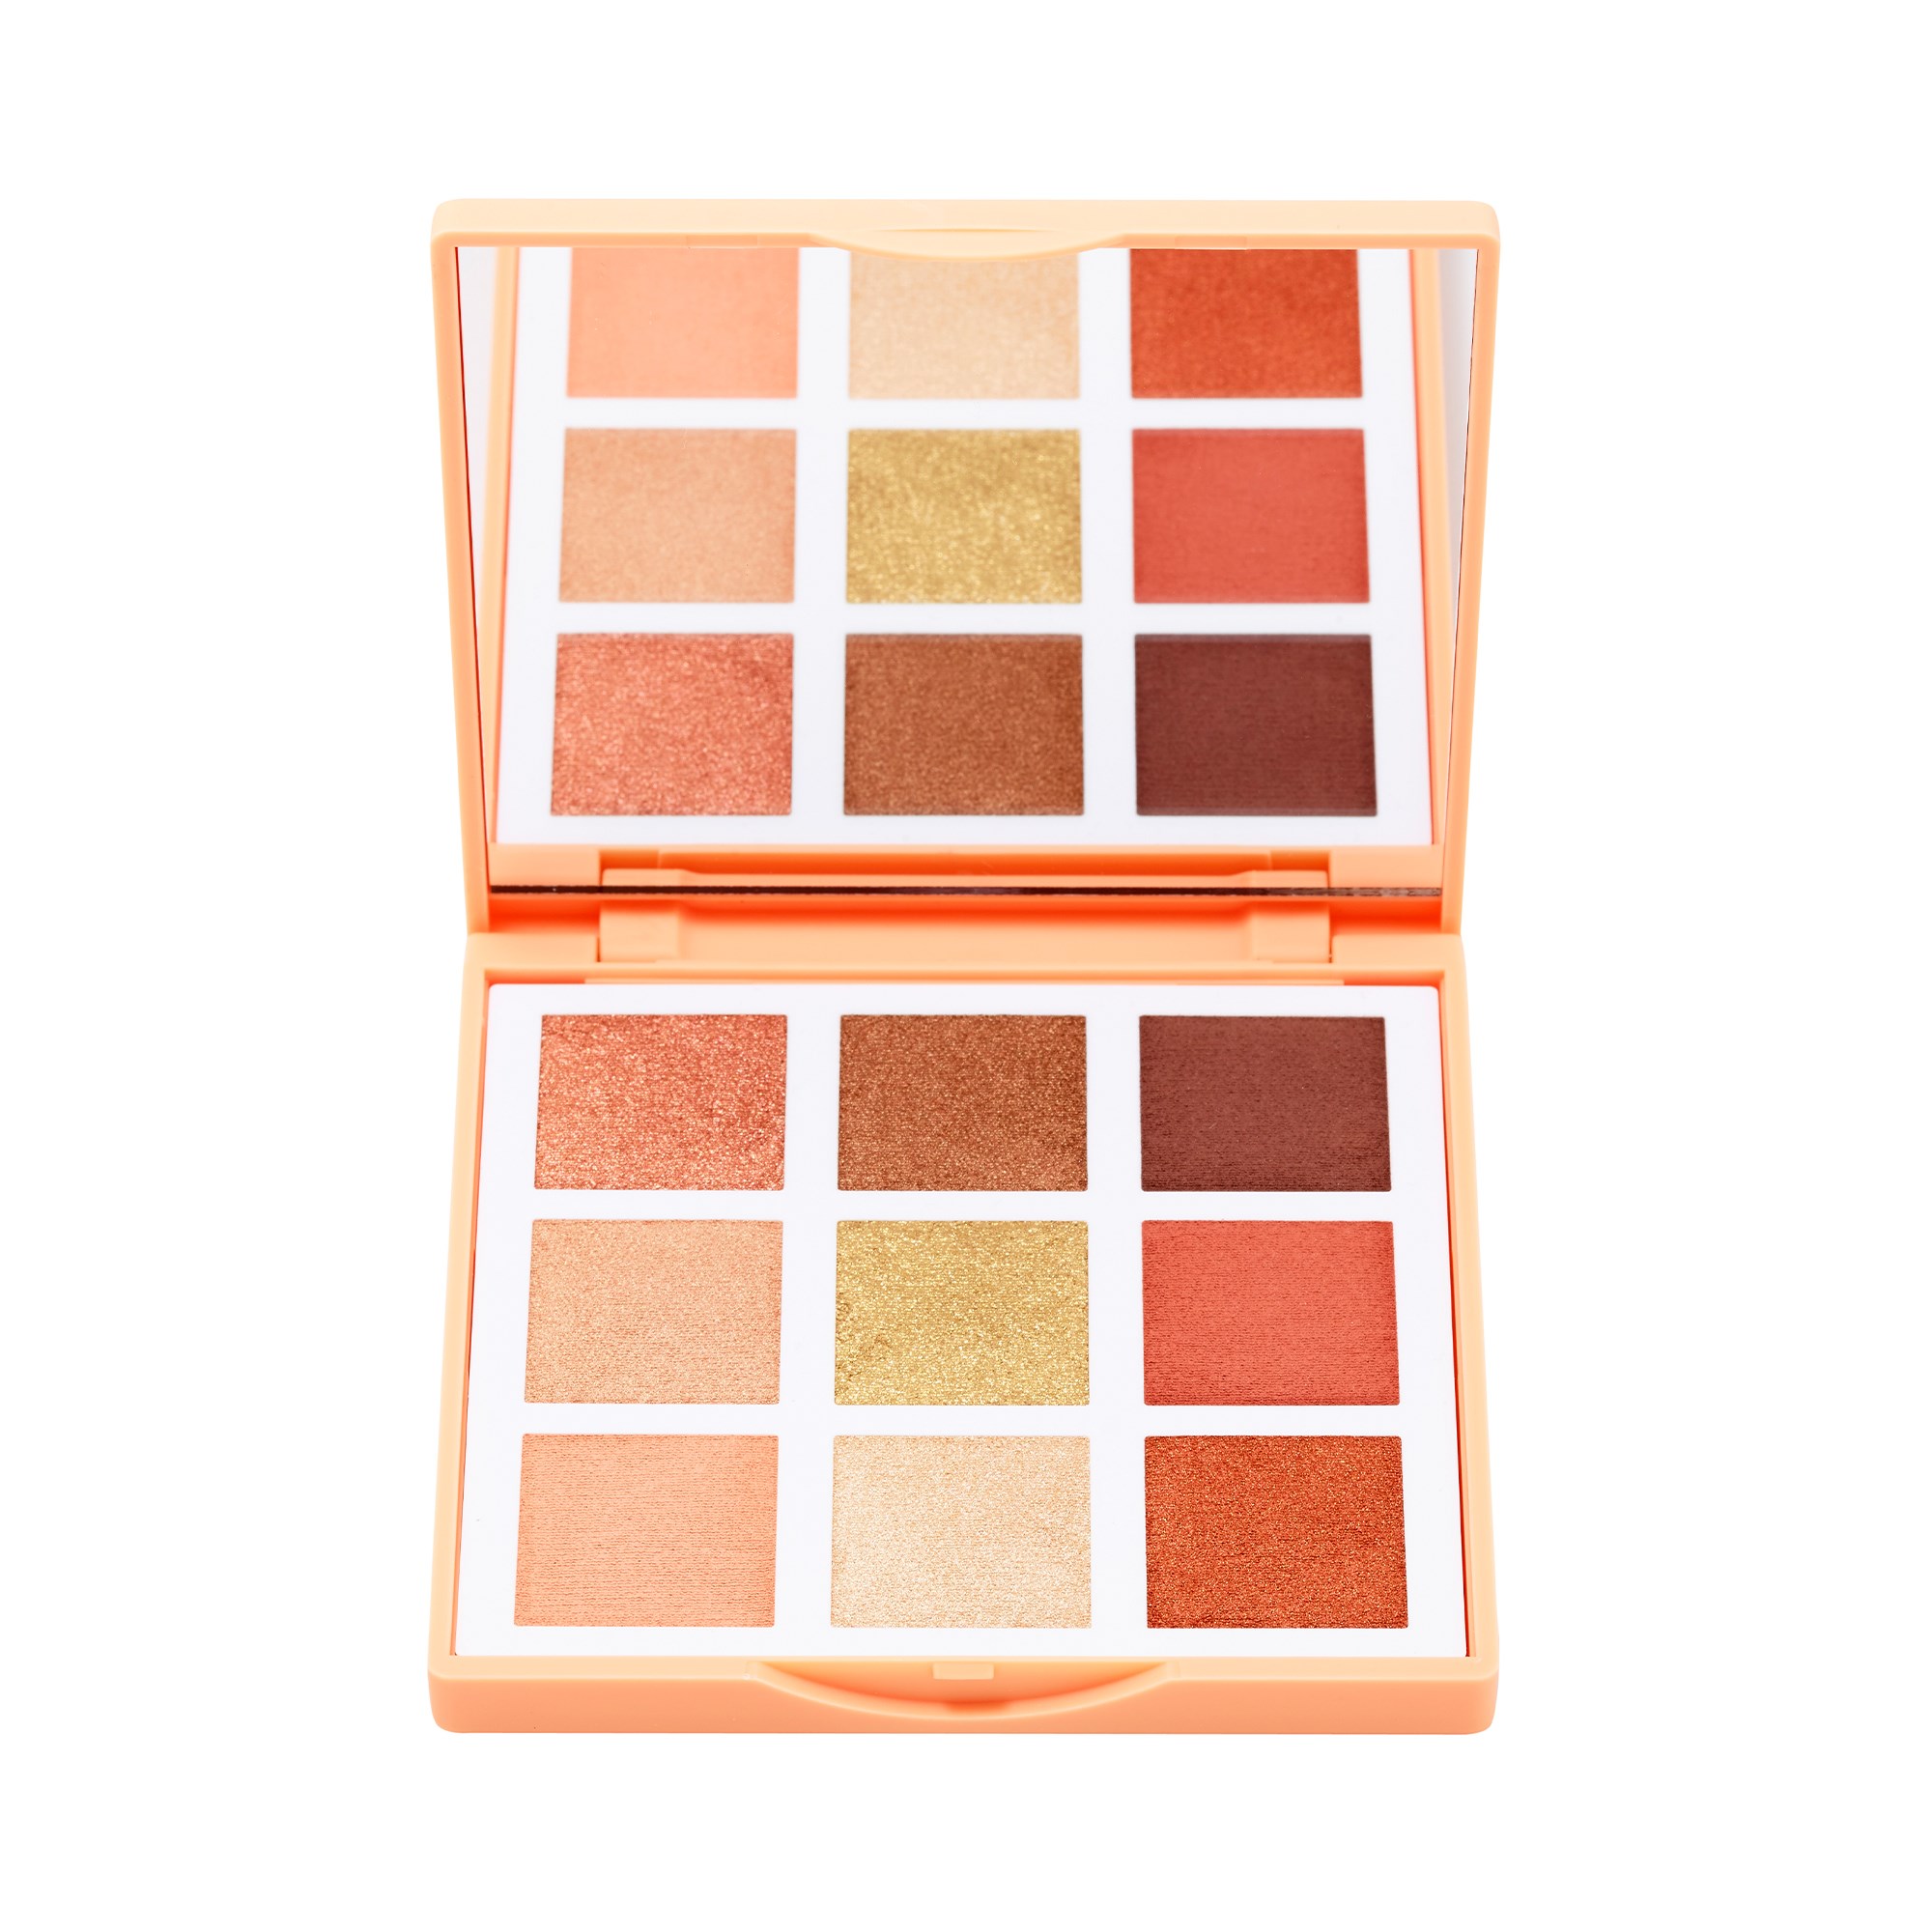 3INA Eyeshadow Palette The Sunset